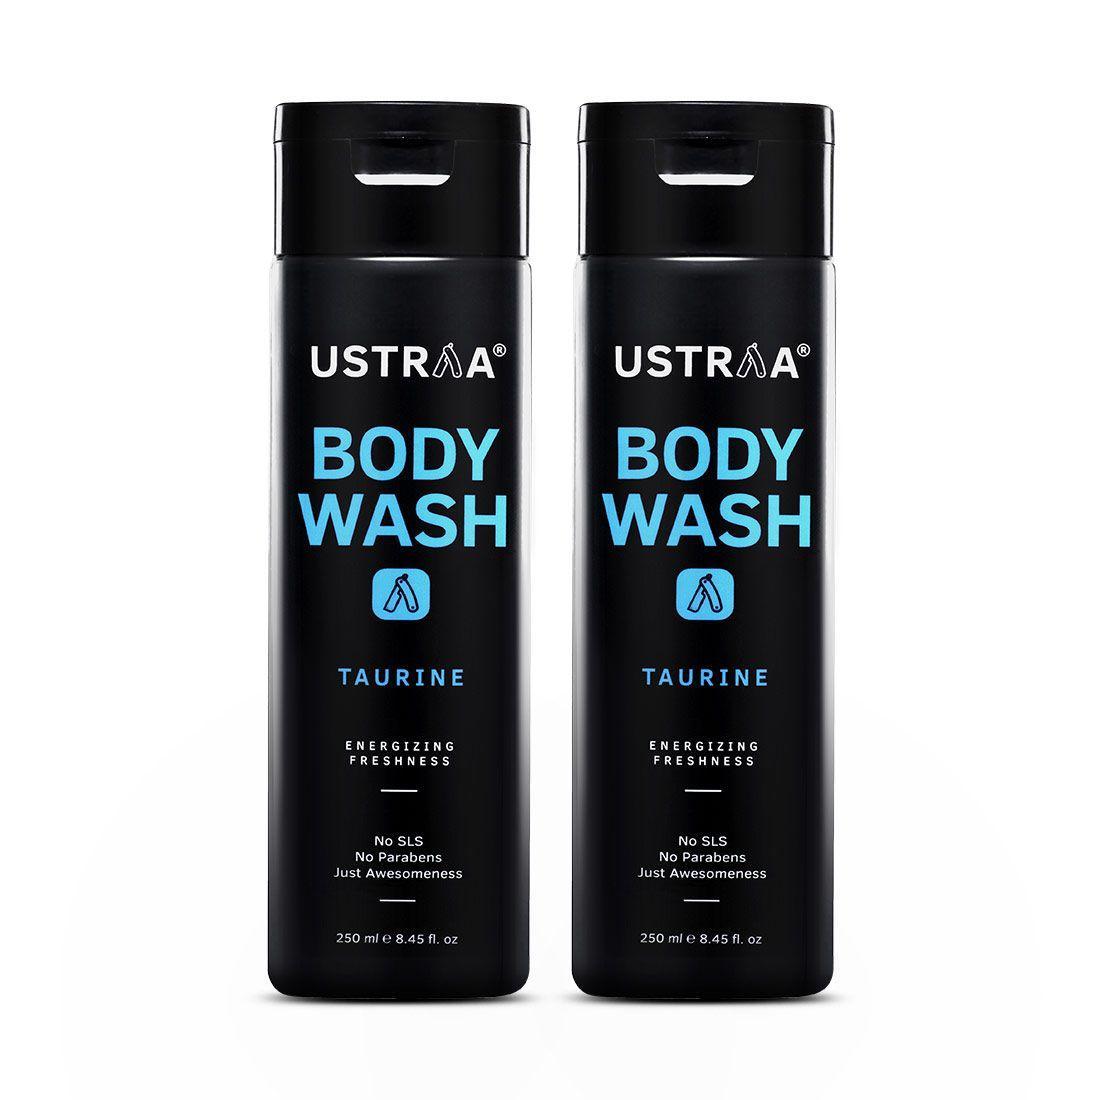 Ustraa Body Wash for Men: With Taurine for Energizing showers and Skin Damage Repair